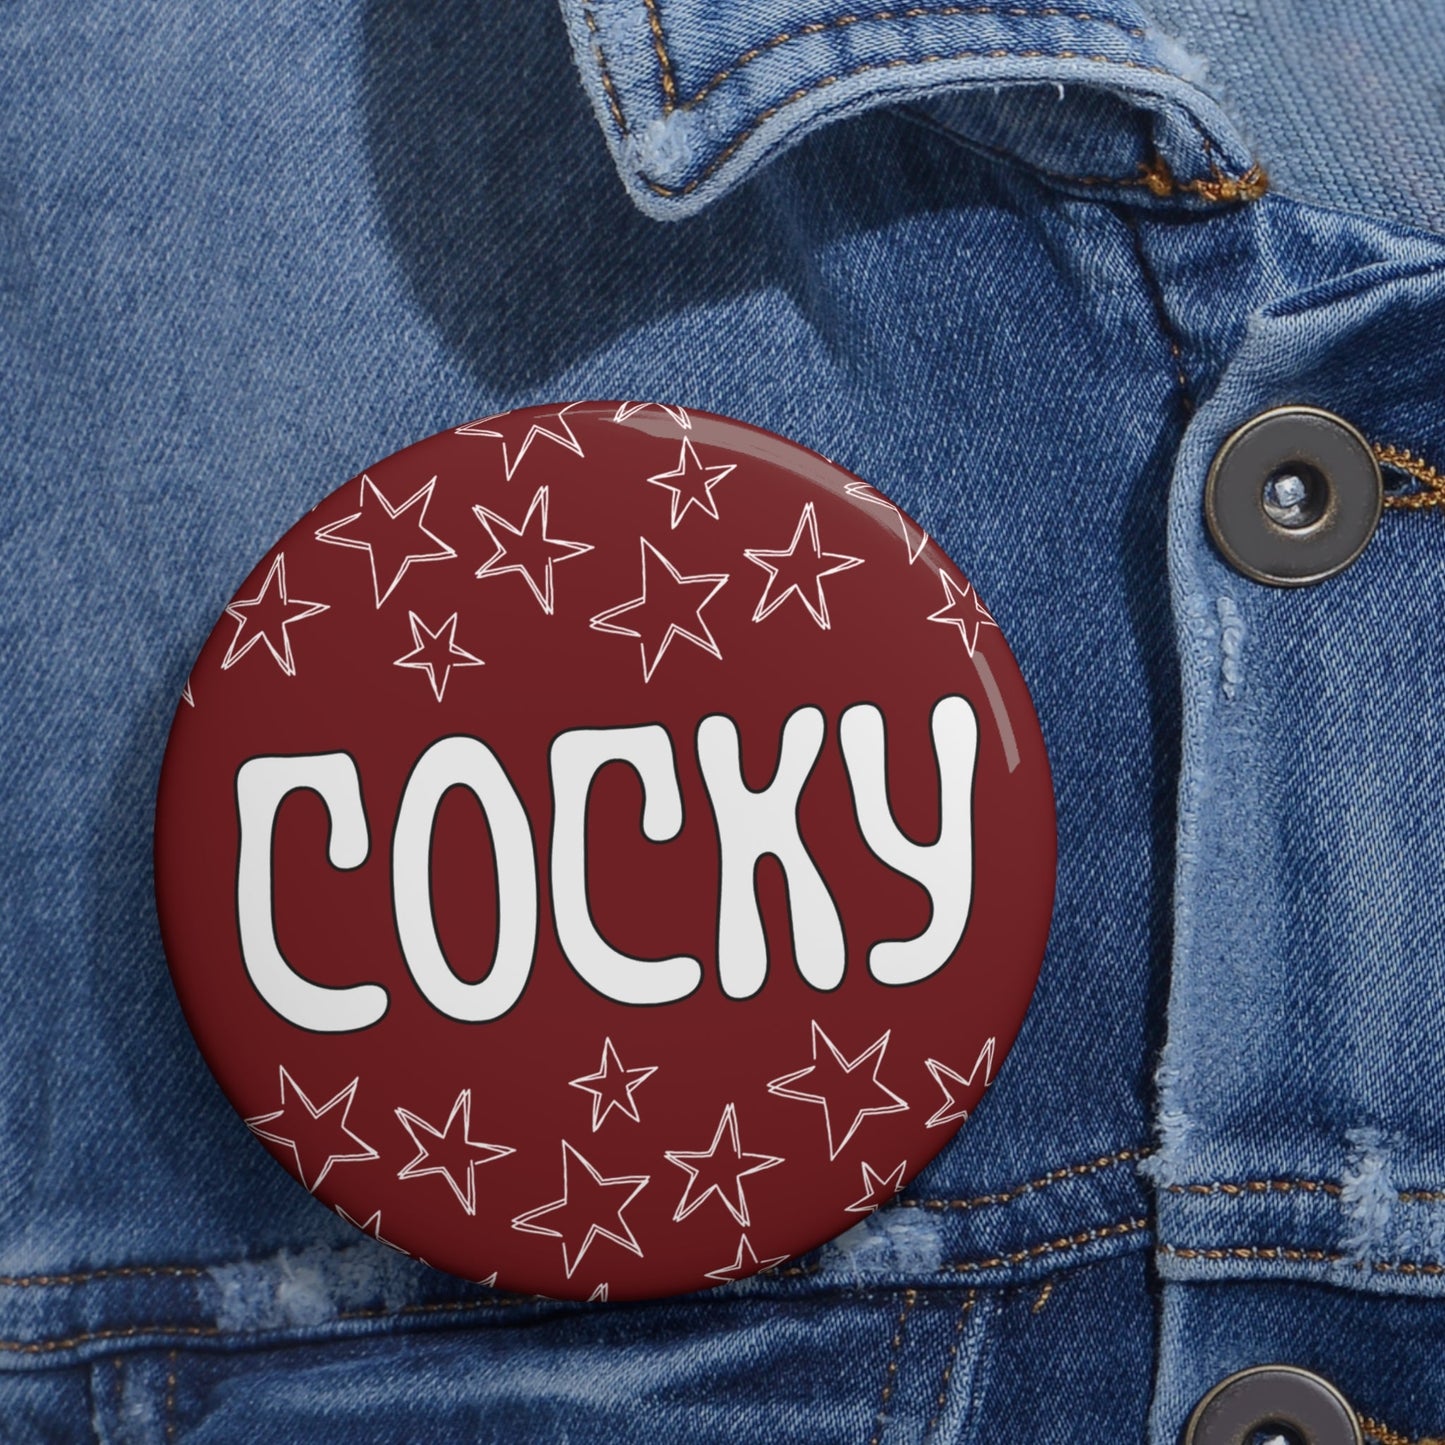 Cocky Gameday Pin